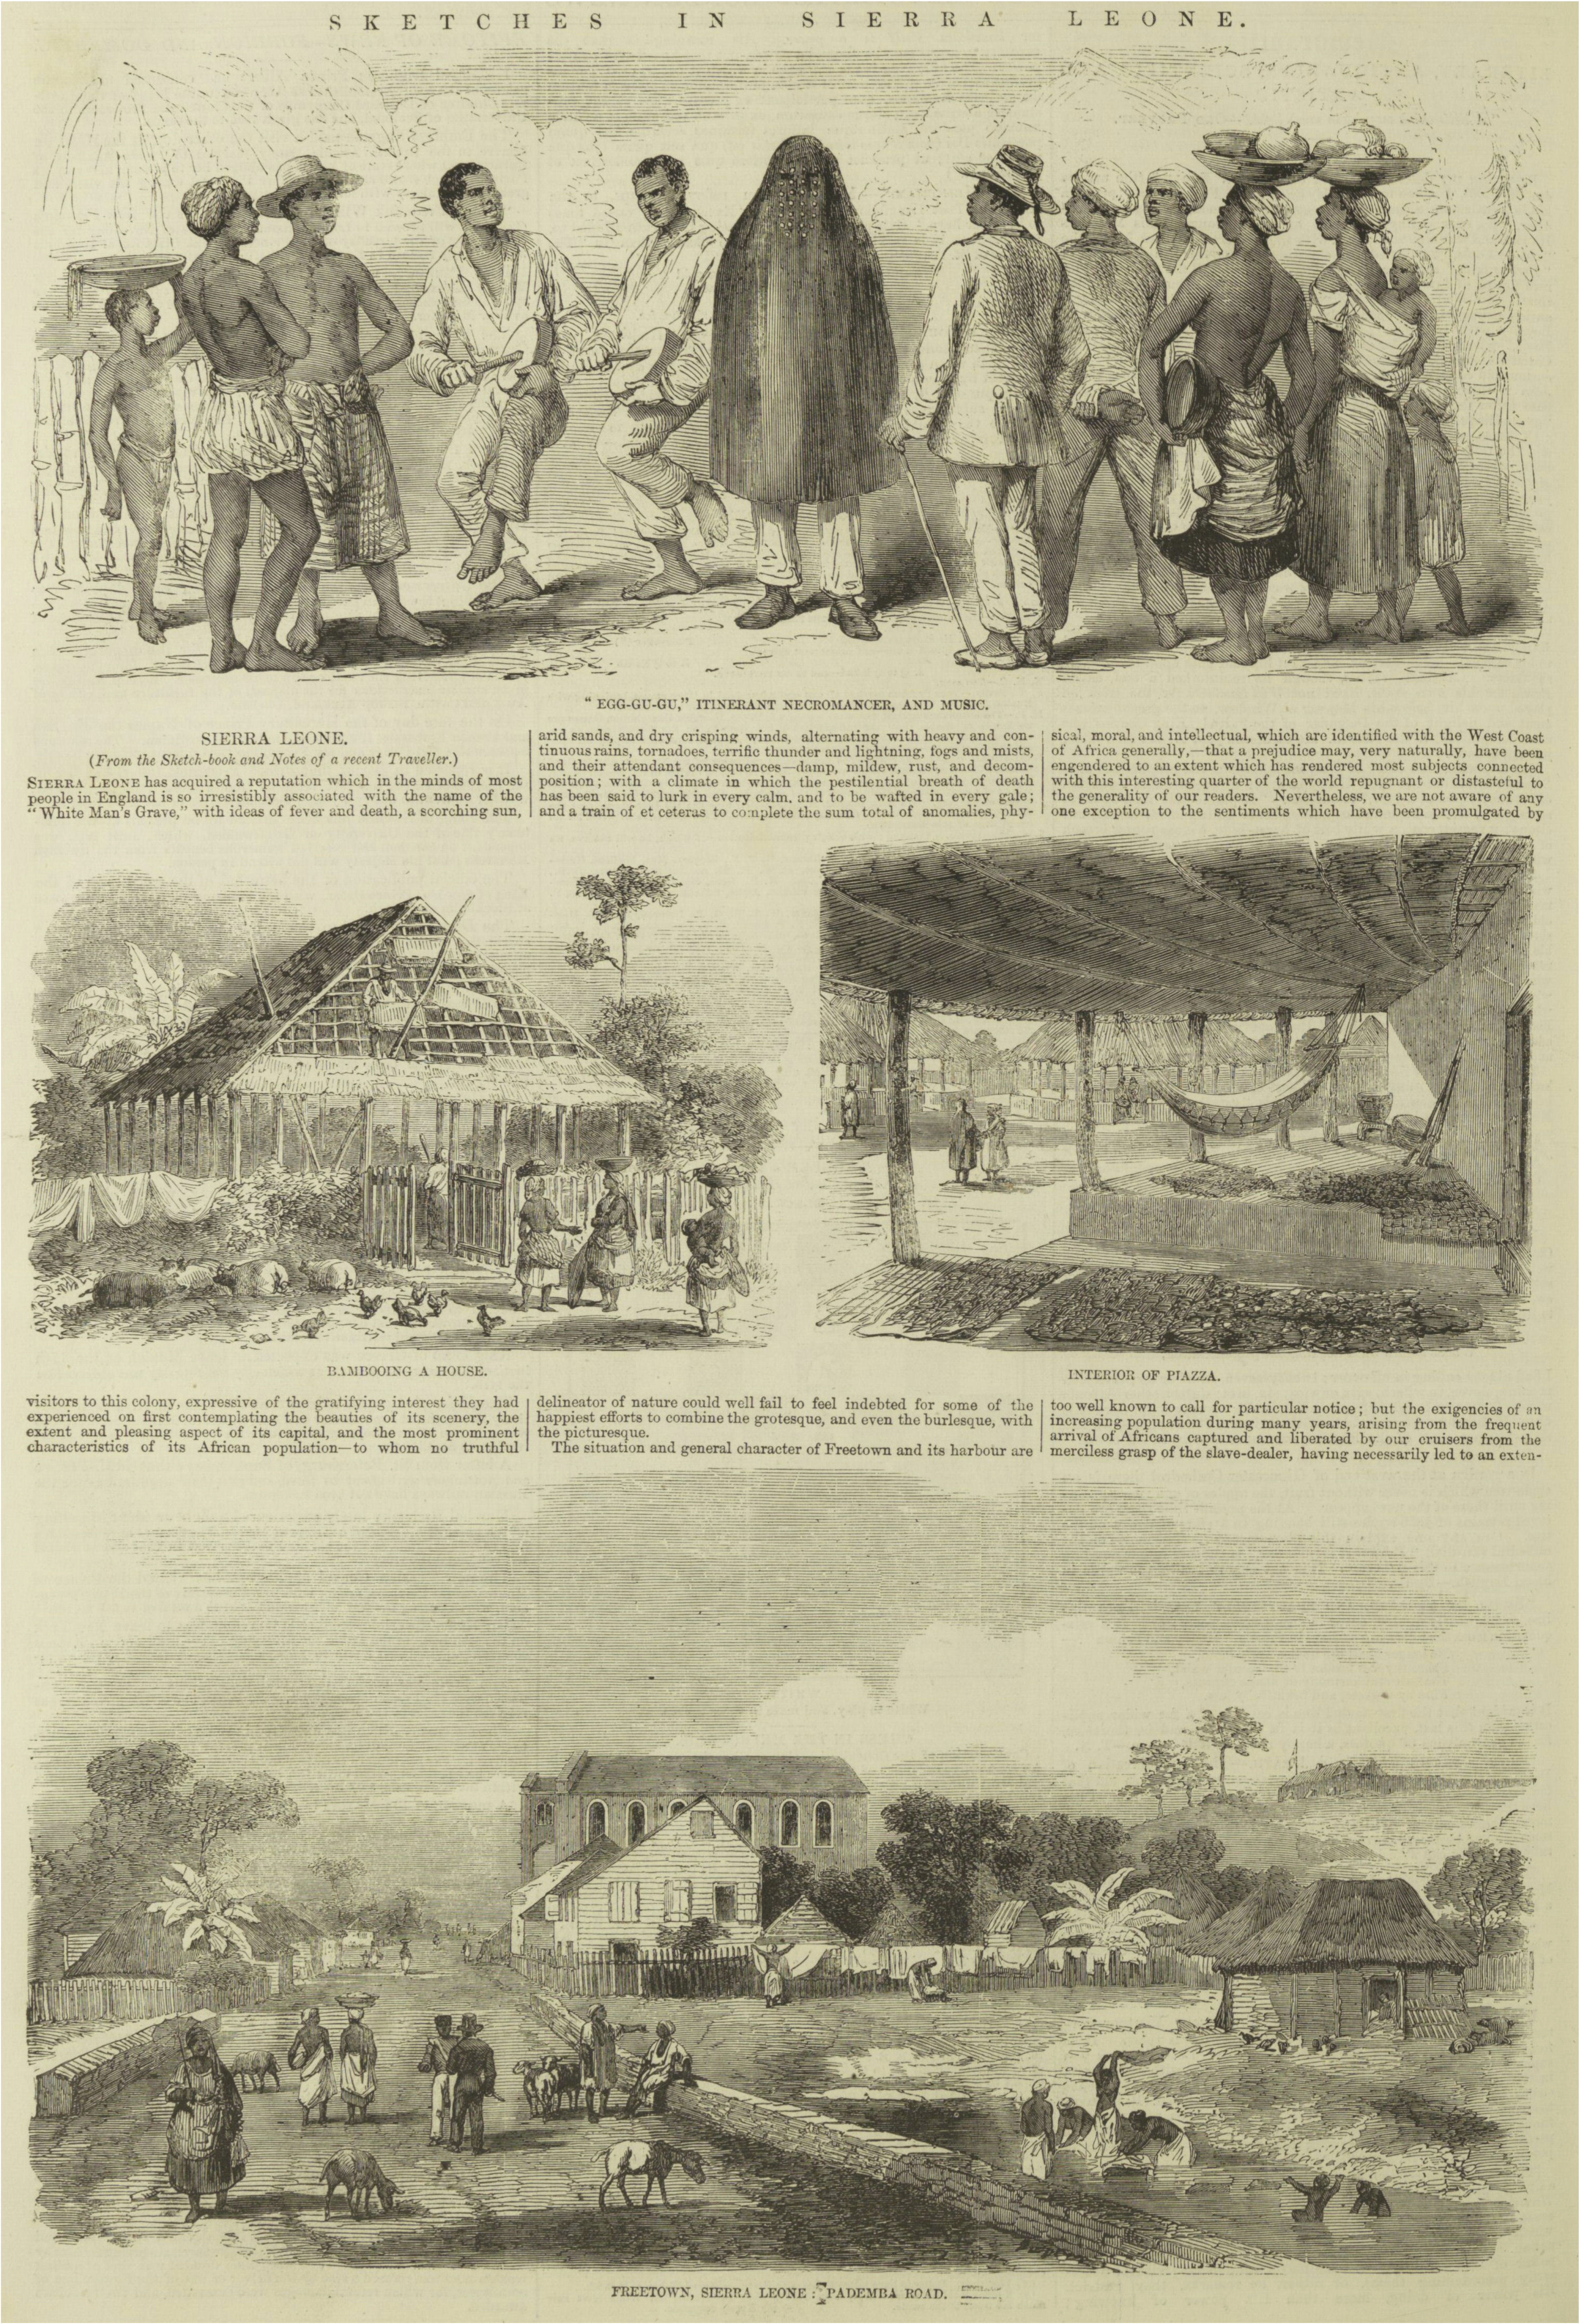 Sketches of Sierra Leone, c. 1881 Illustrated London News